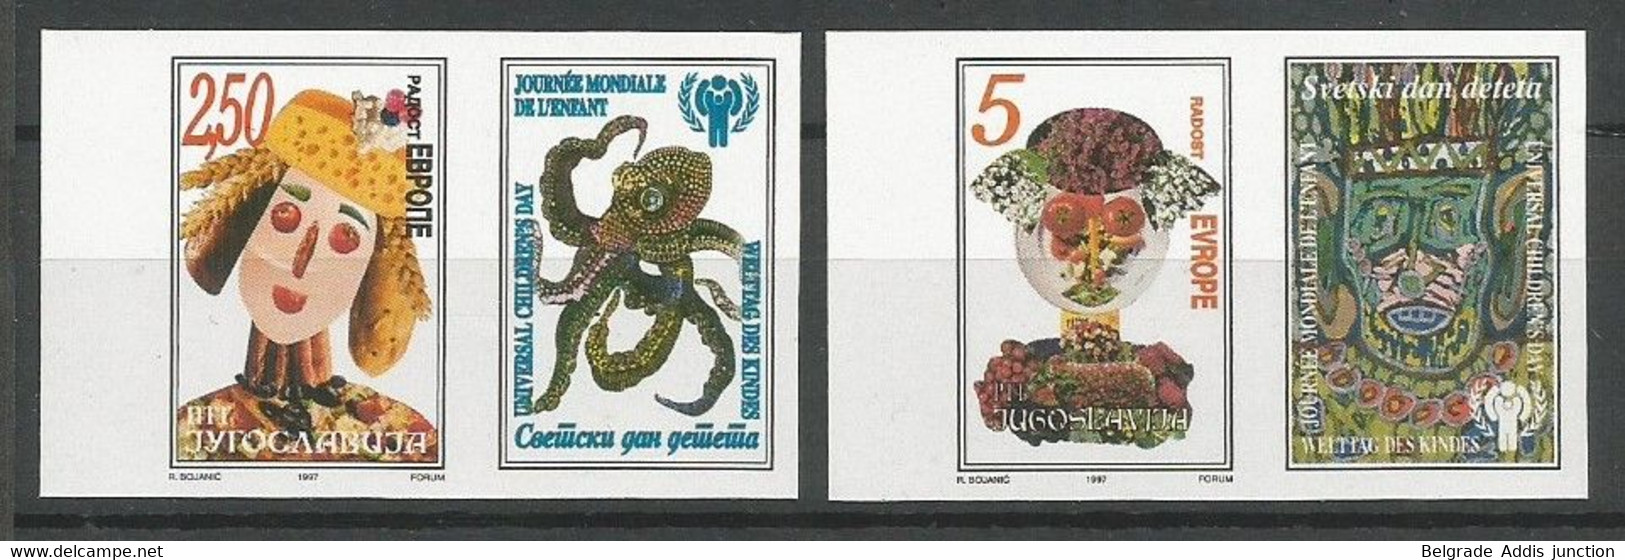 Yugoslavia Mi.2834/35 IMPERFORATED PROOF ESSAYS With LABELS Unadopted Design ** / MNH 1997 Europa Hang-on Issues RARITY! - Non Dentelés, épreuves & Variétés